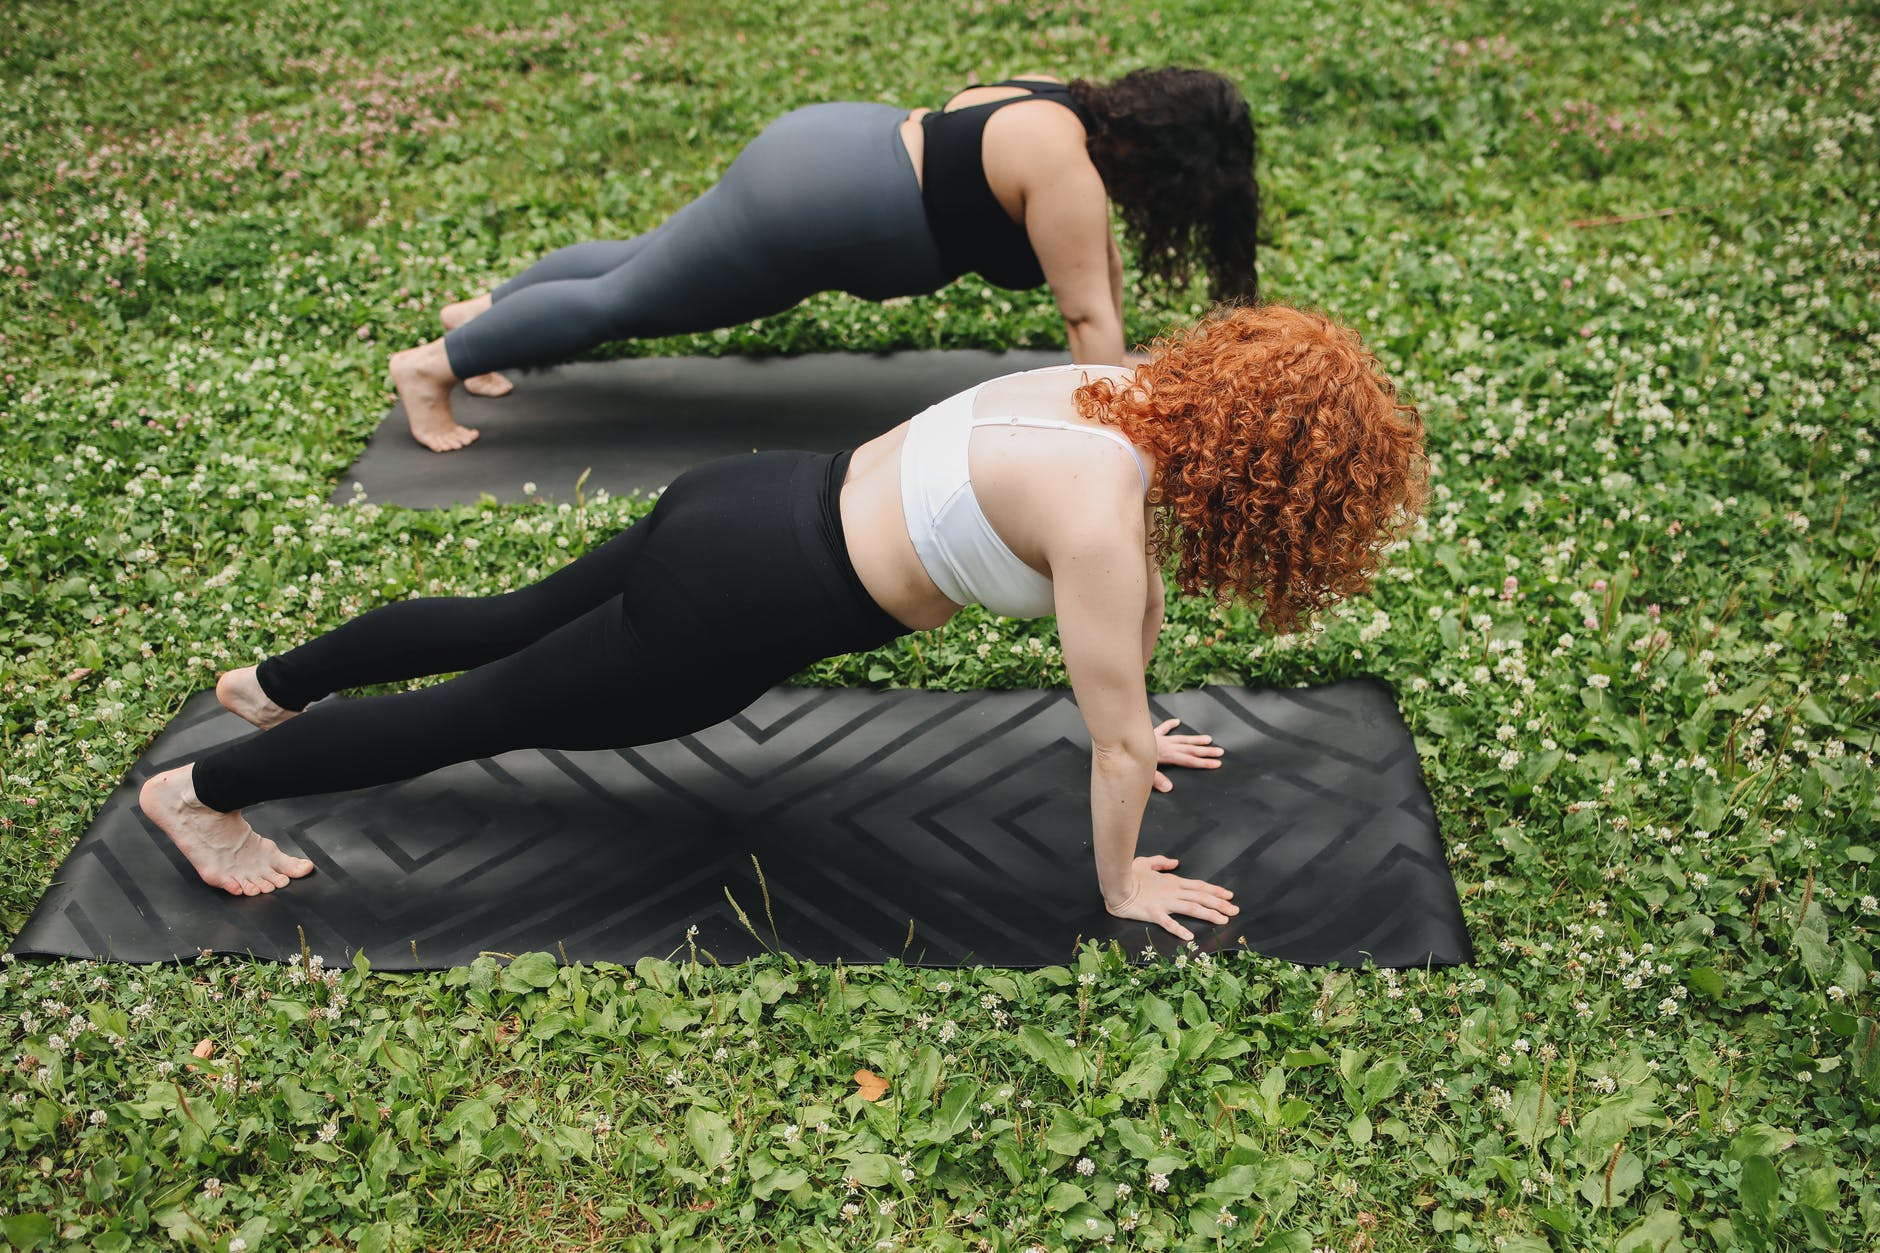 women in sports bra working out on yoga mat